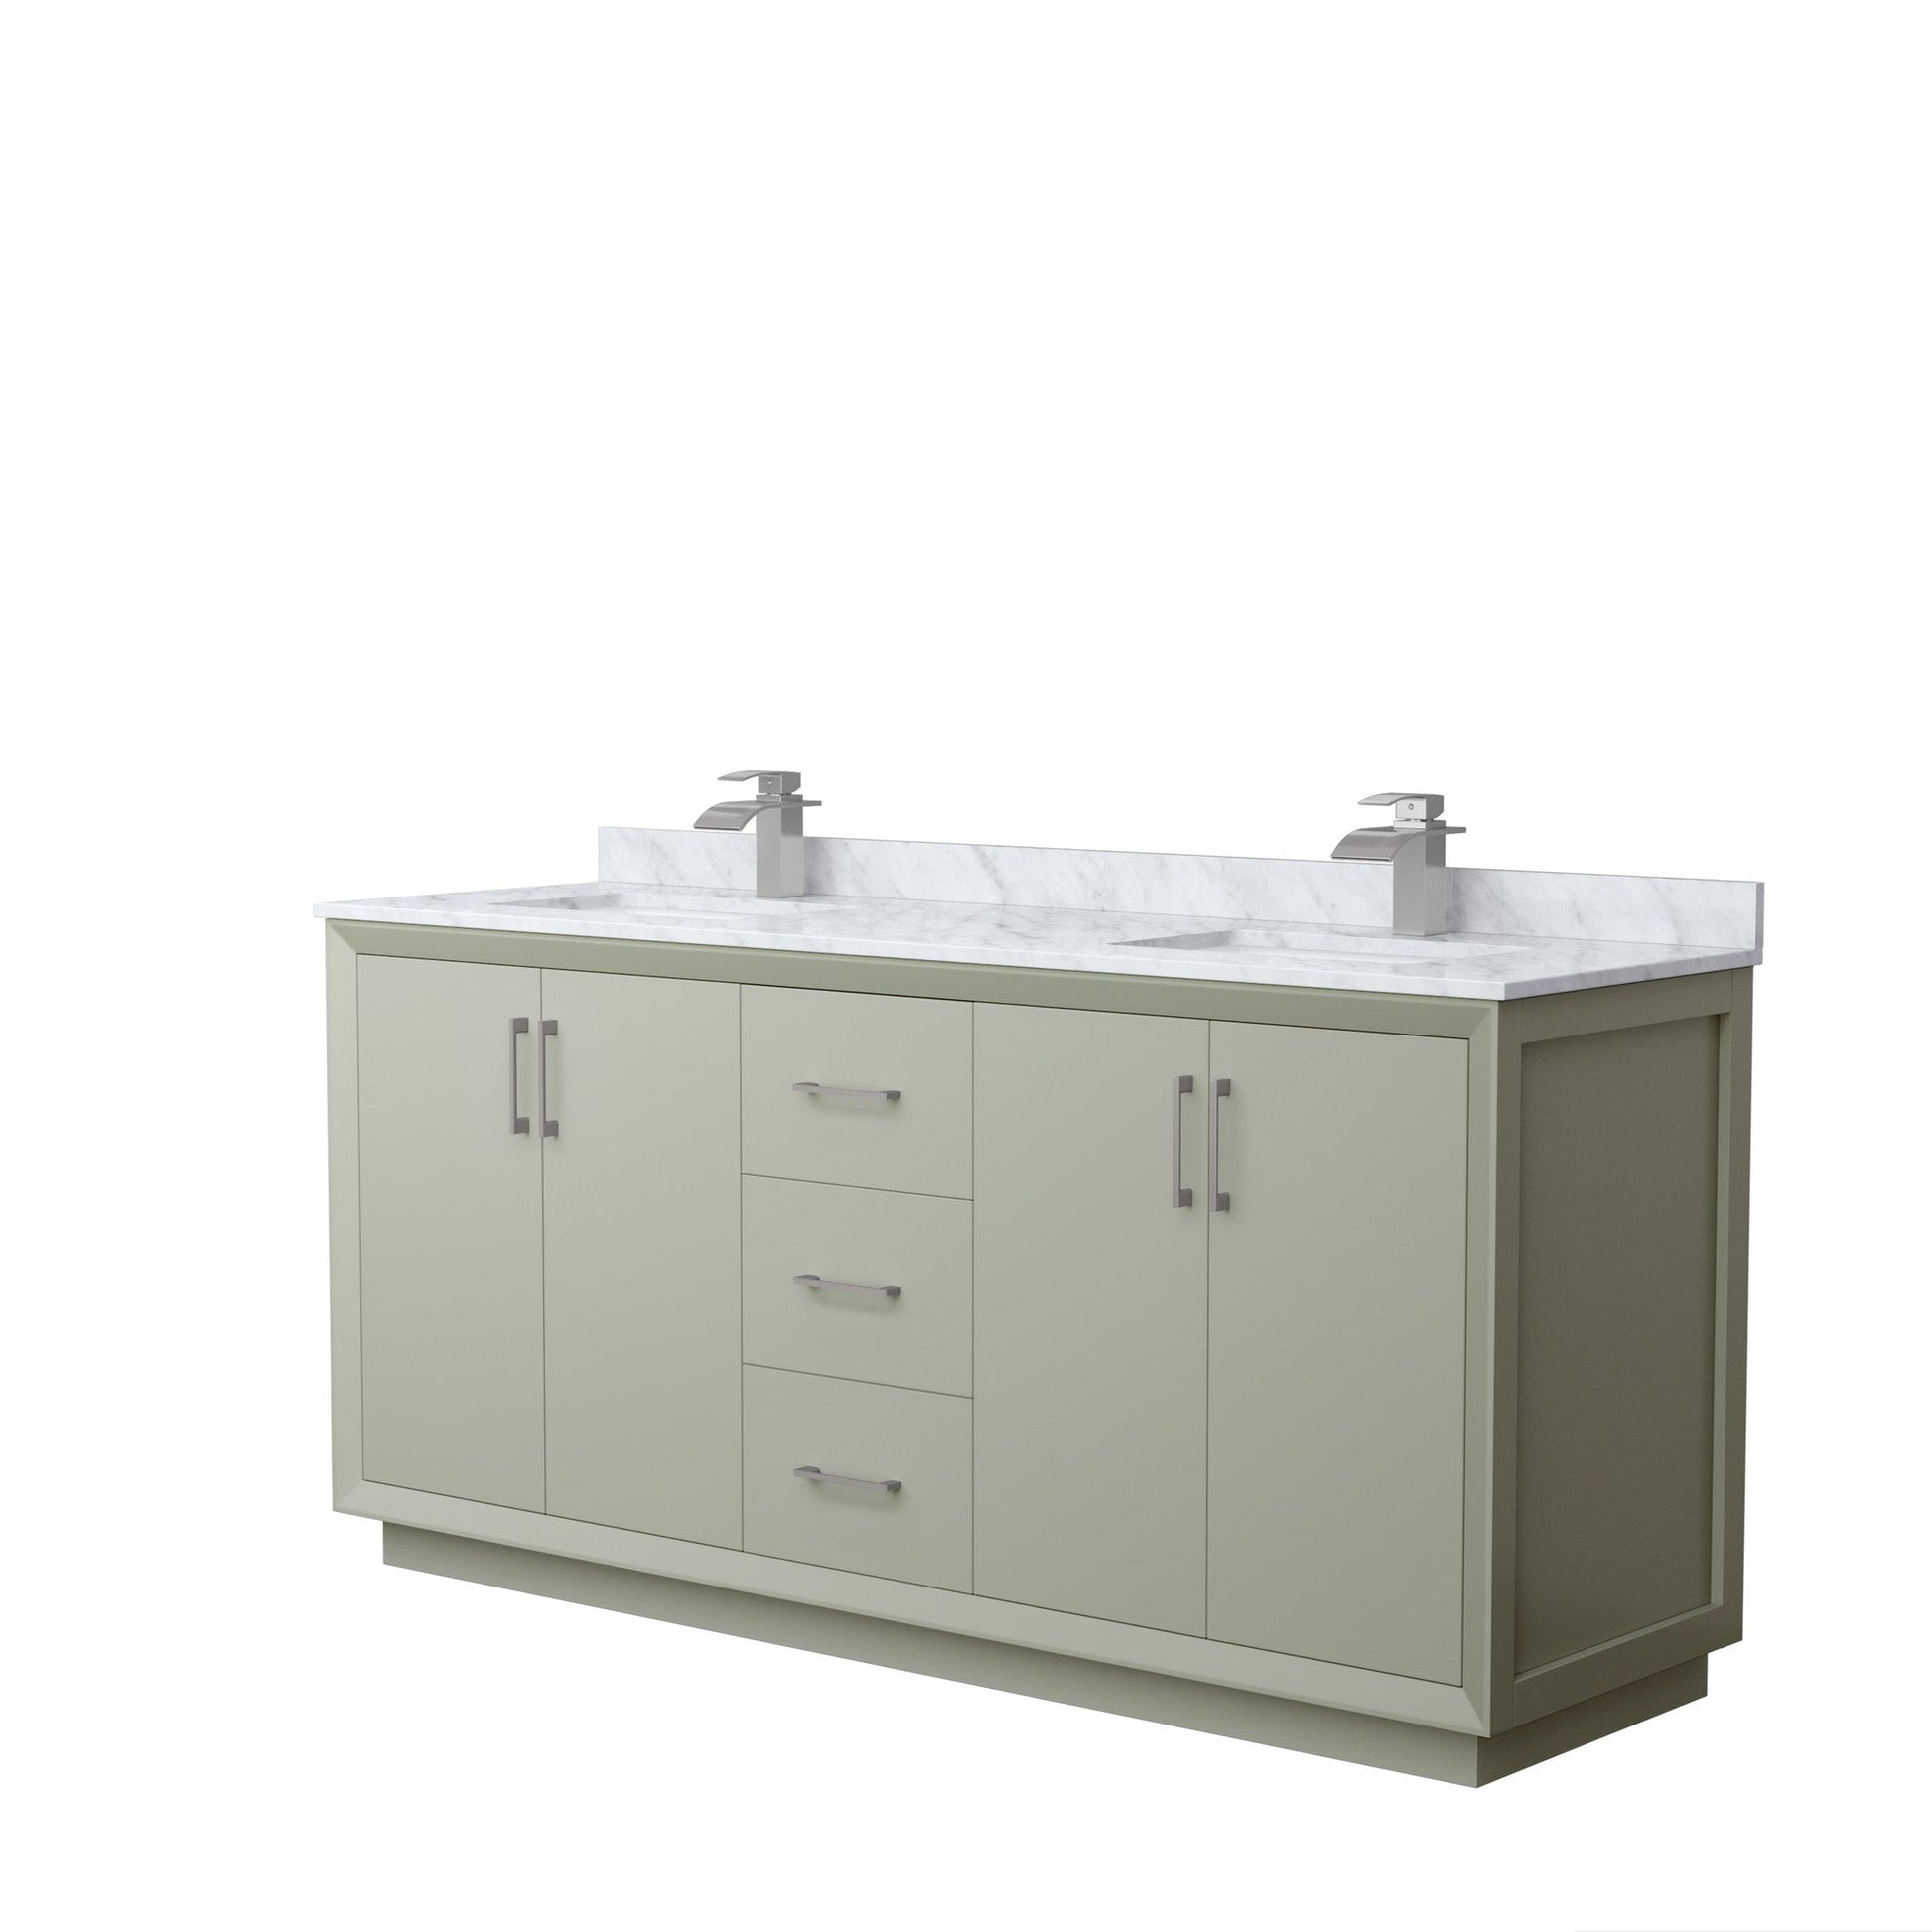 Wyndham Collection Strada 72" Double Bathroom Vanity in Light Green, White Carrara Marble Countertop, Undermount Square Sinks, Brushed Nickel Trim